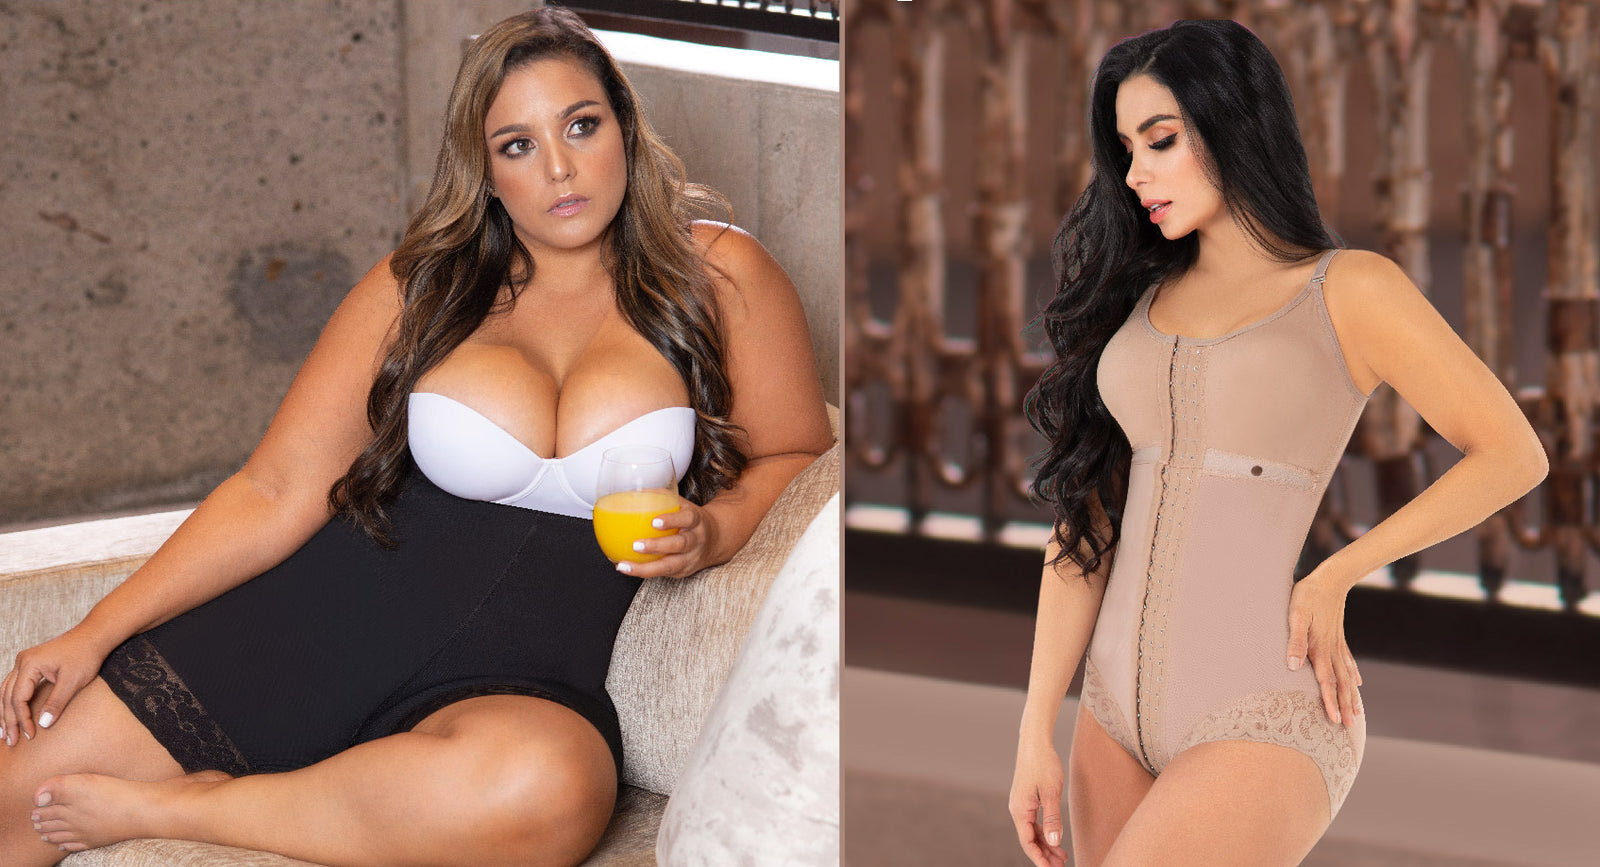 4 types of bodyshapers and what they can do to your body